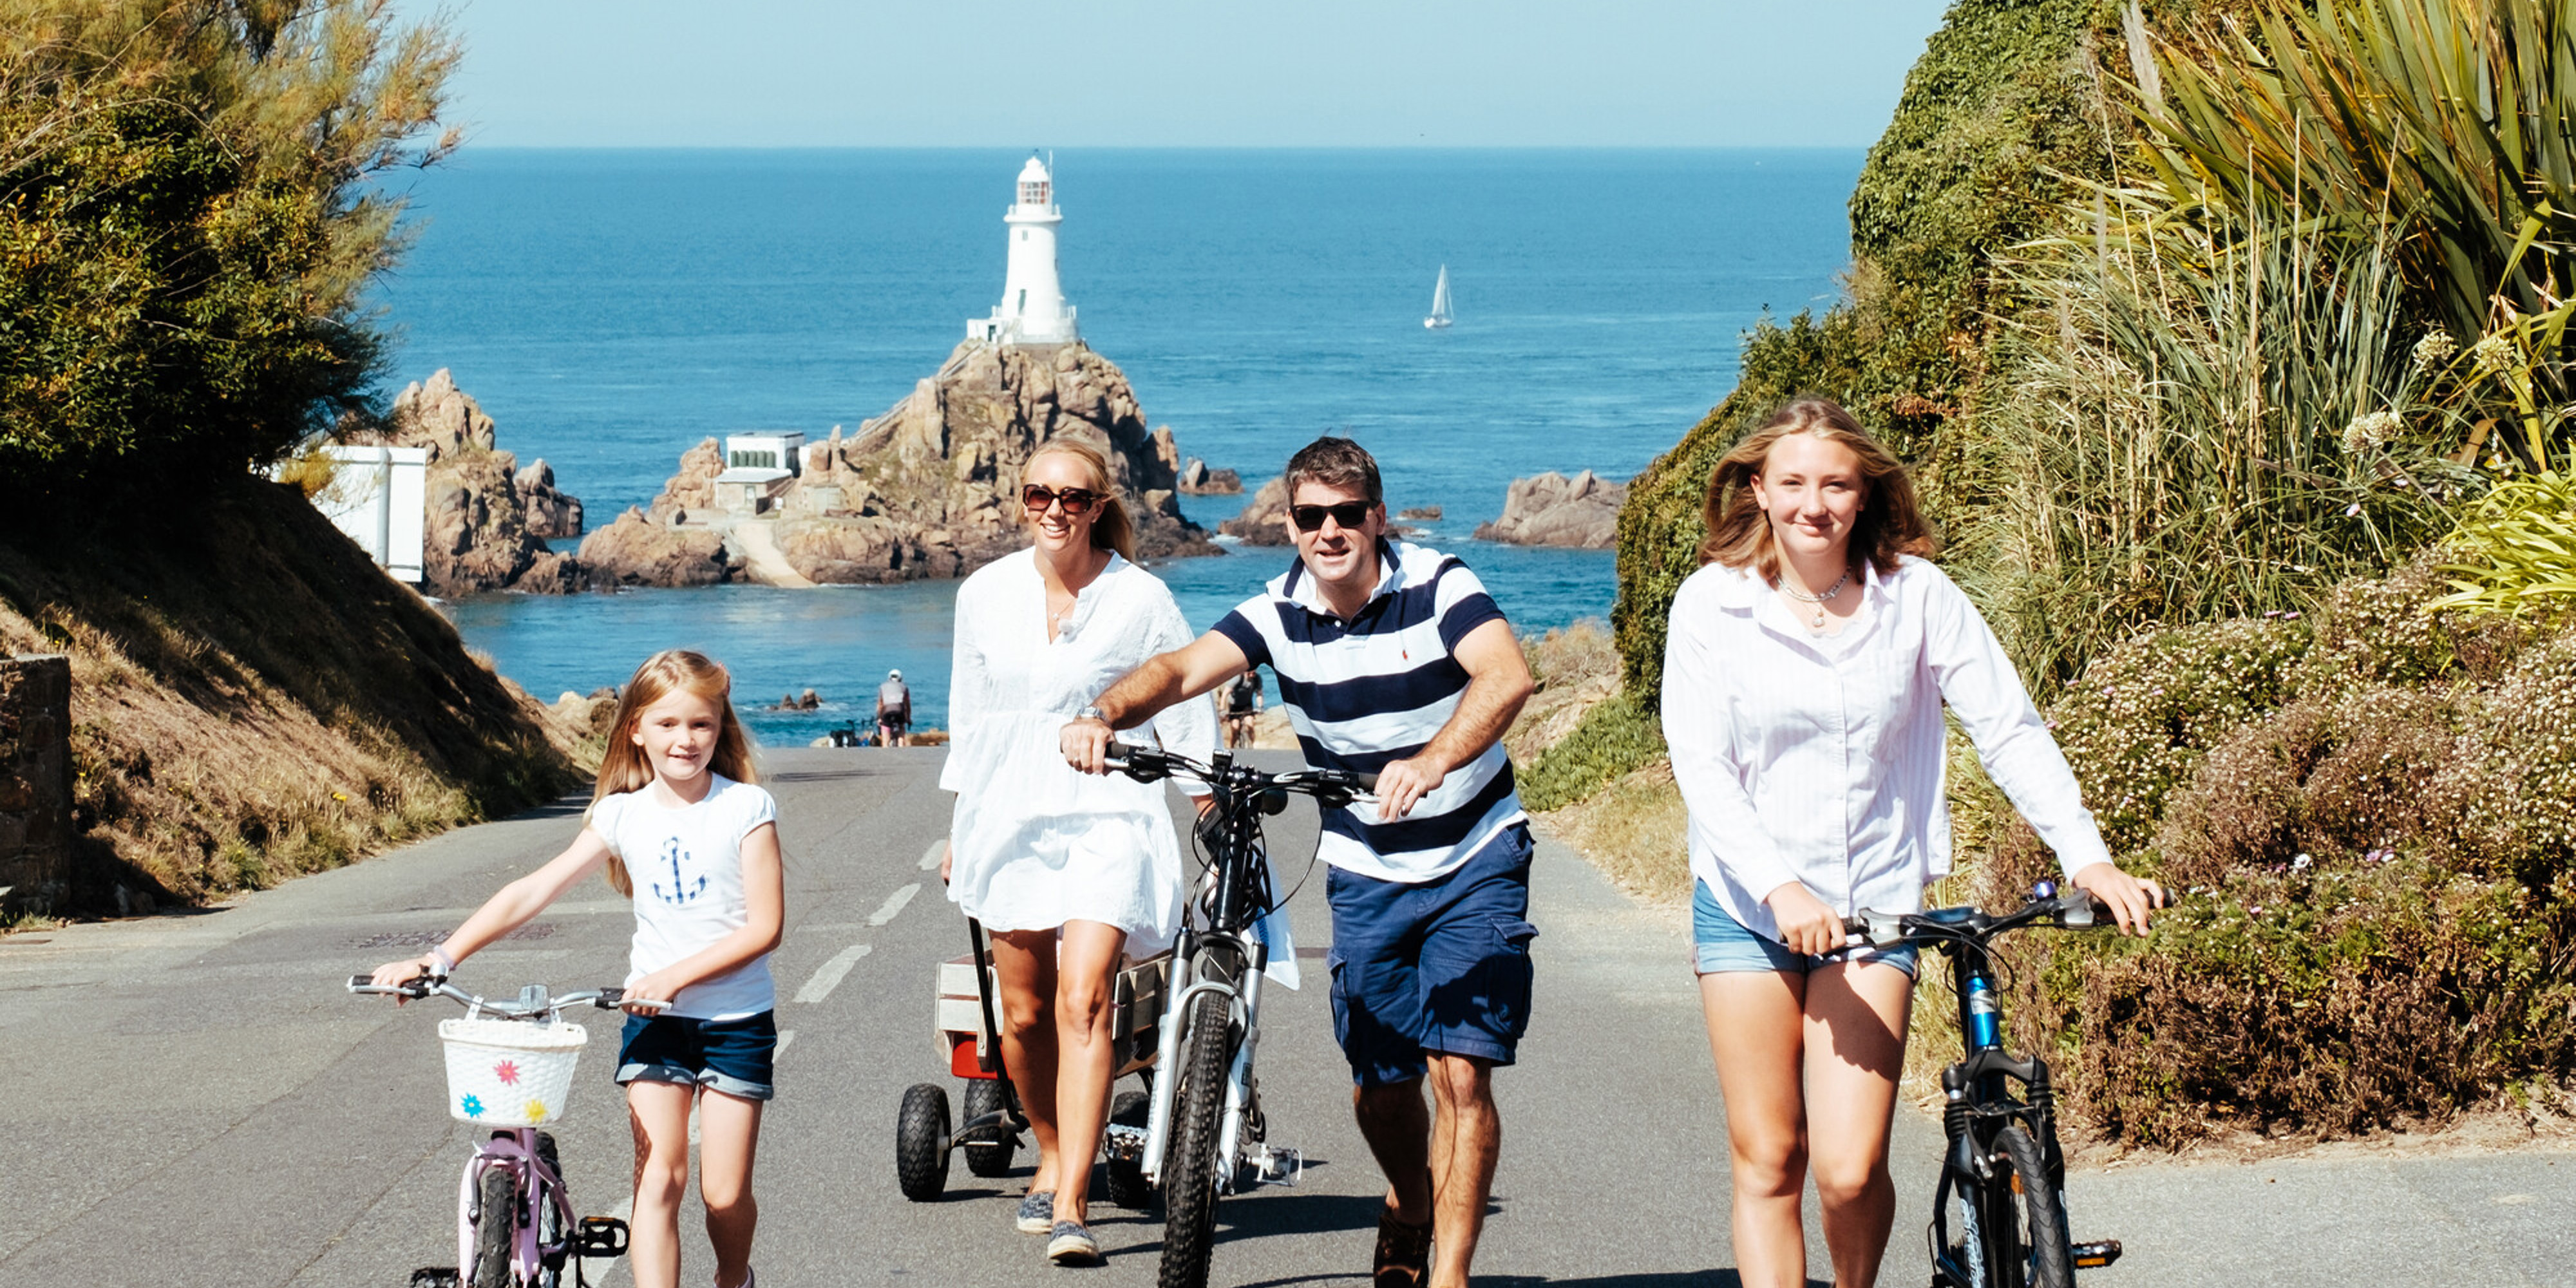 Visiting Corbiere Lighthouse by bike